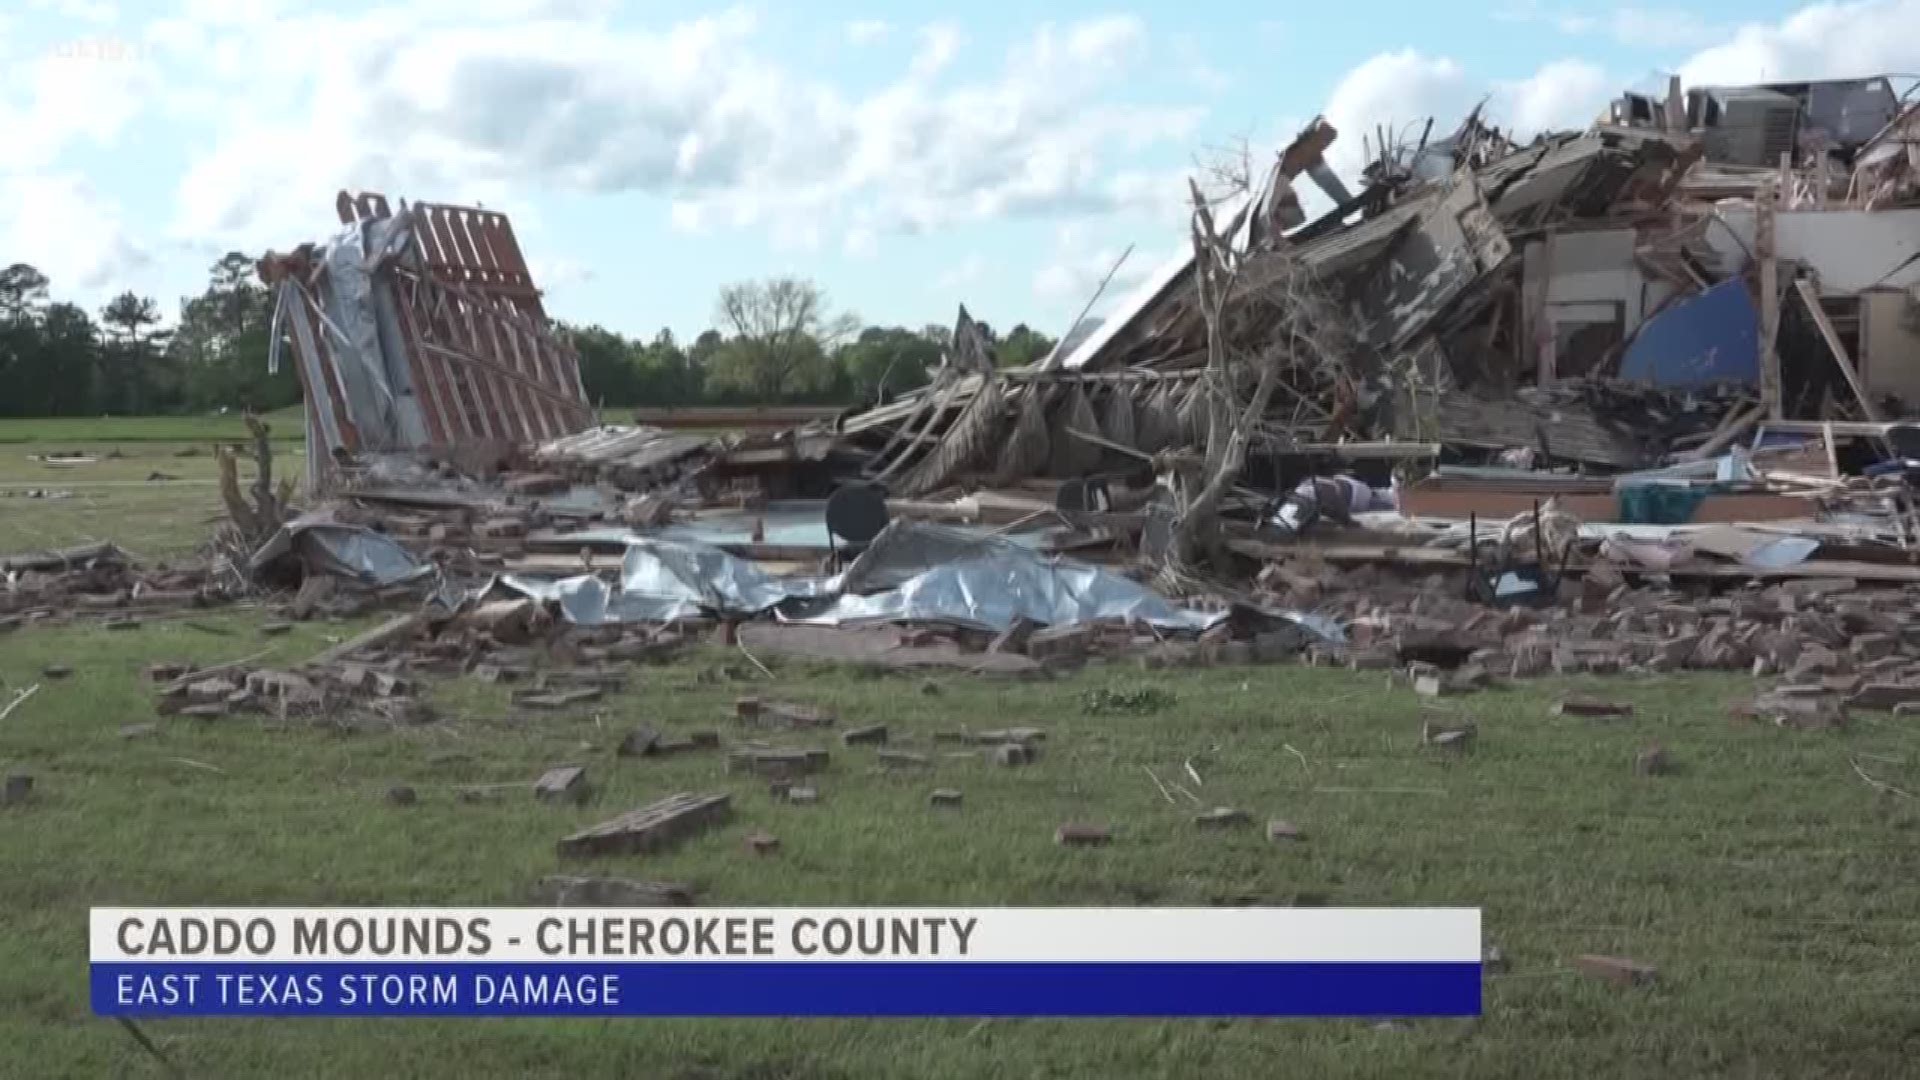 At least 25 people were injured after a tornado struck Caddo Mounds State Historic Site during an annual festival held at the park.